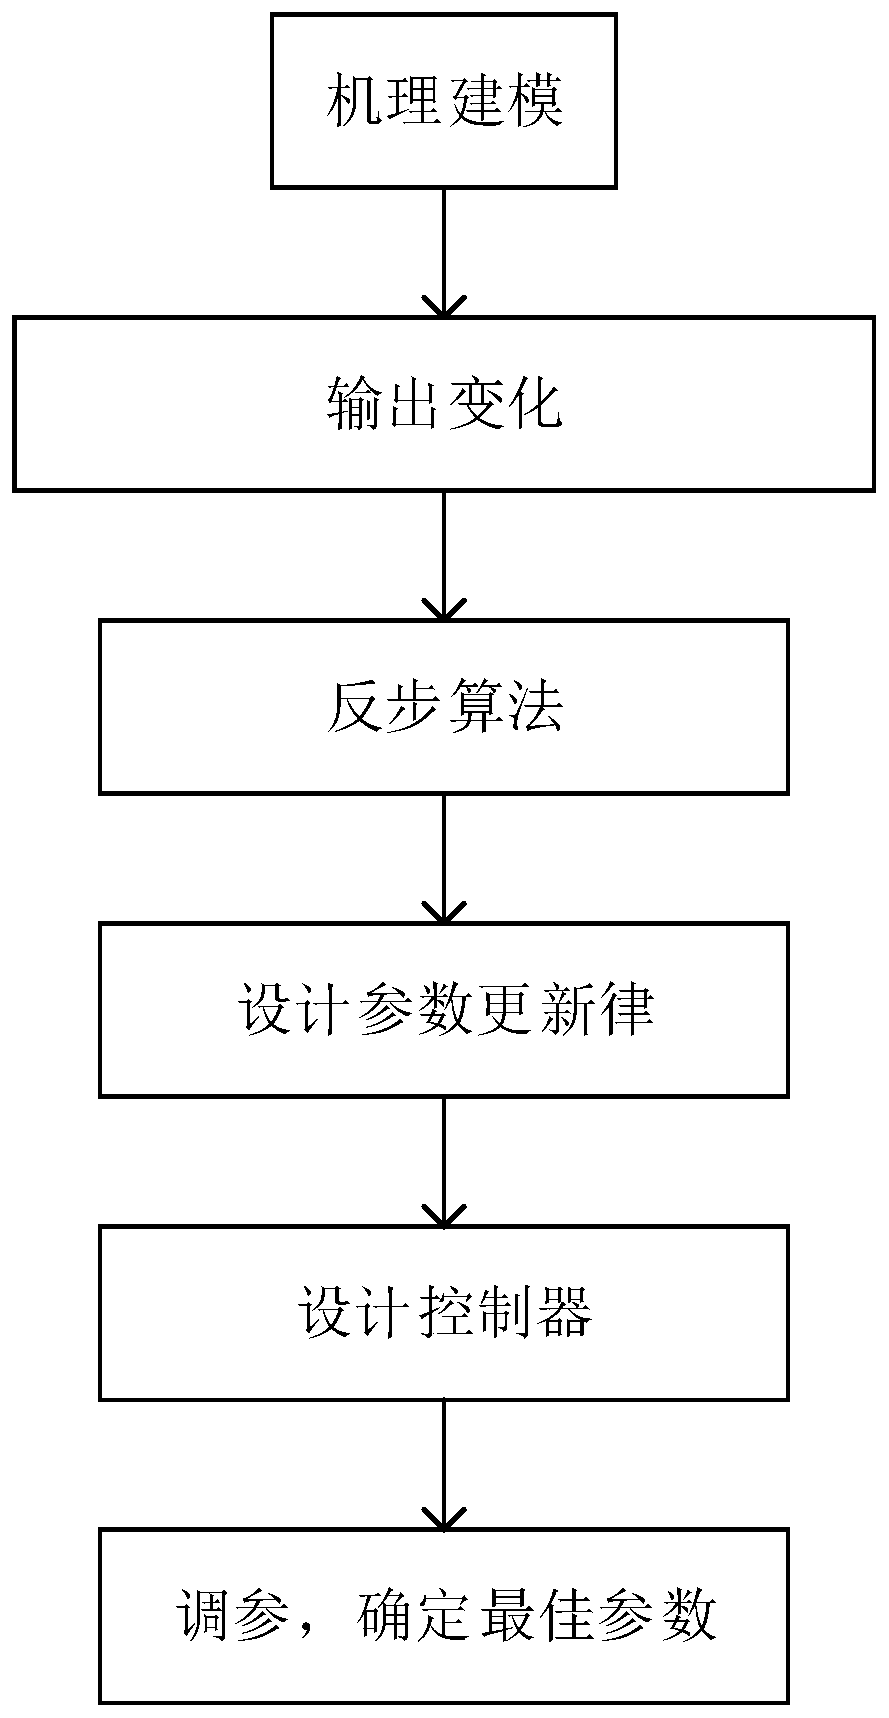 Coal-fired unit drum boiler water level control method for improving transient performance based on parameter self-adaptation